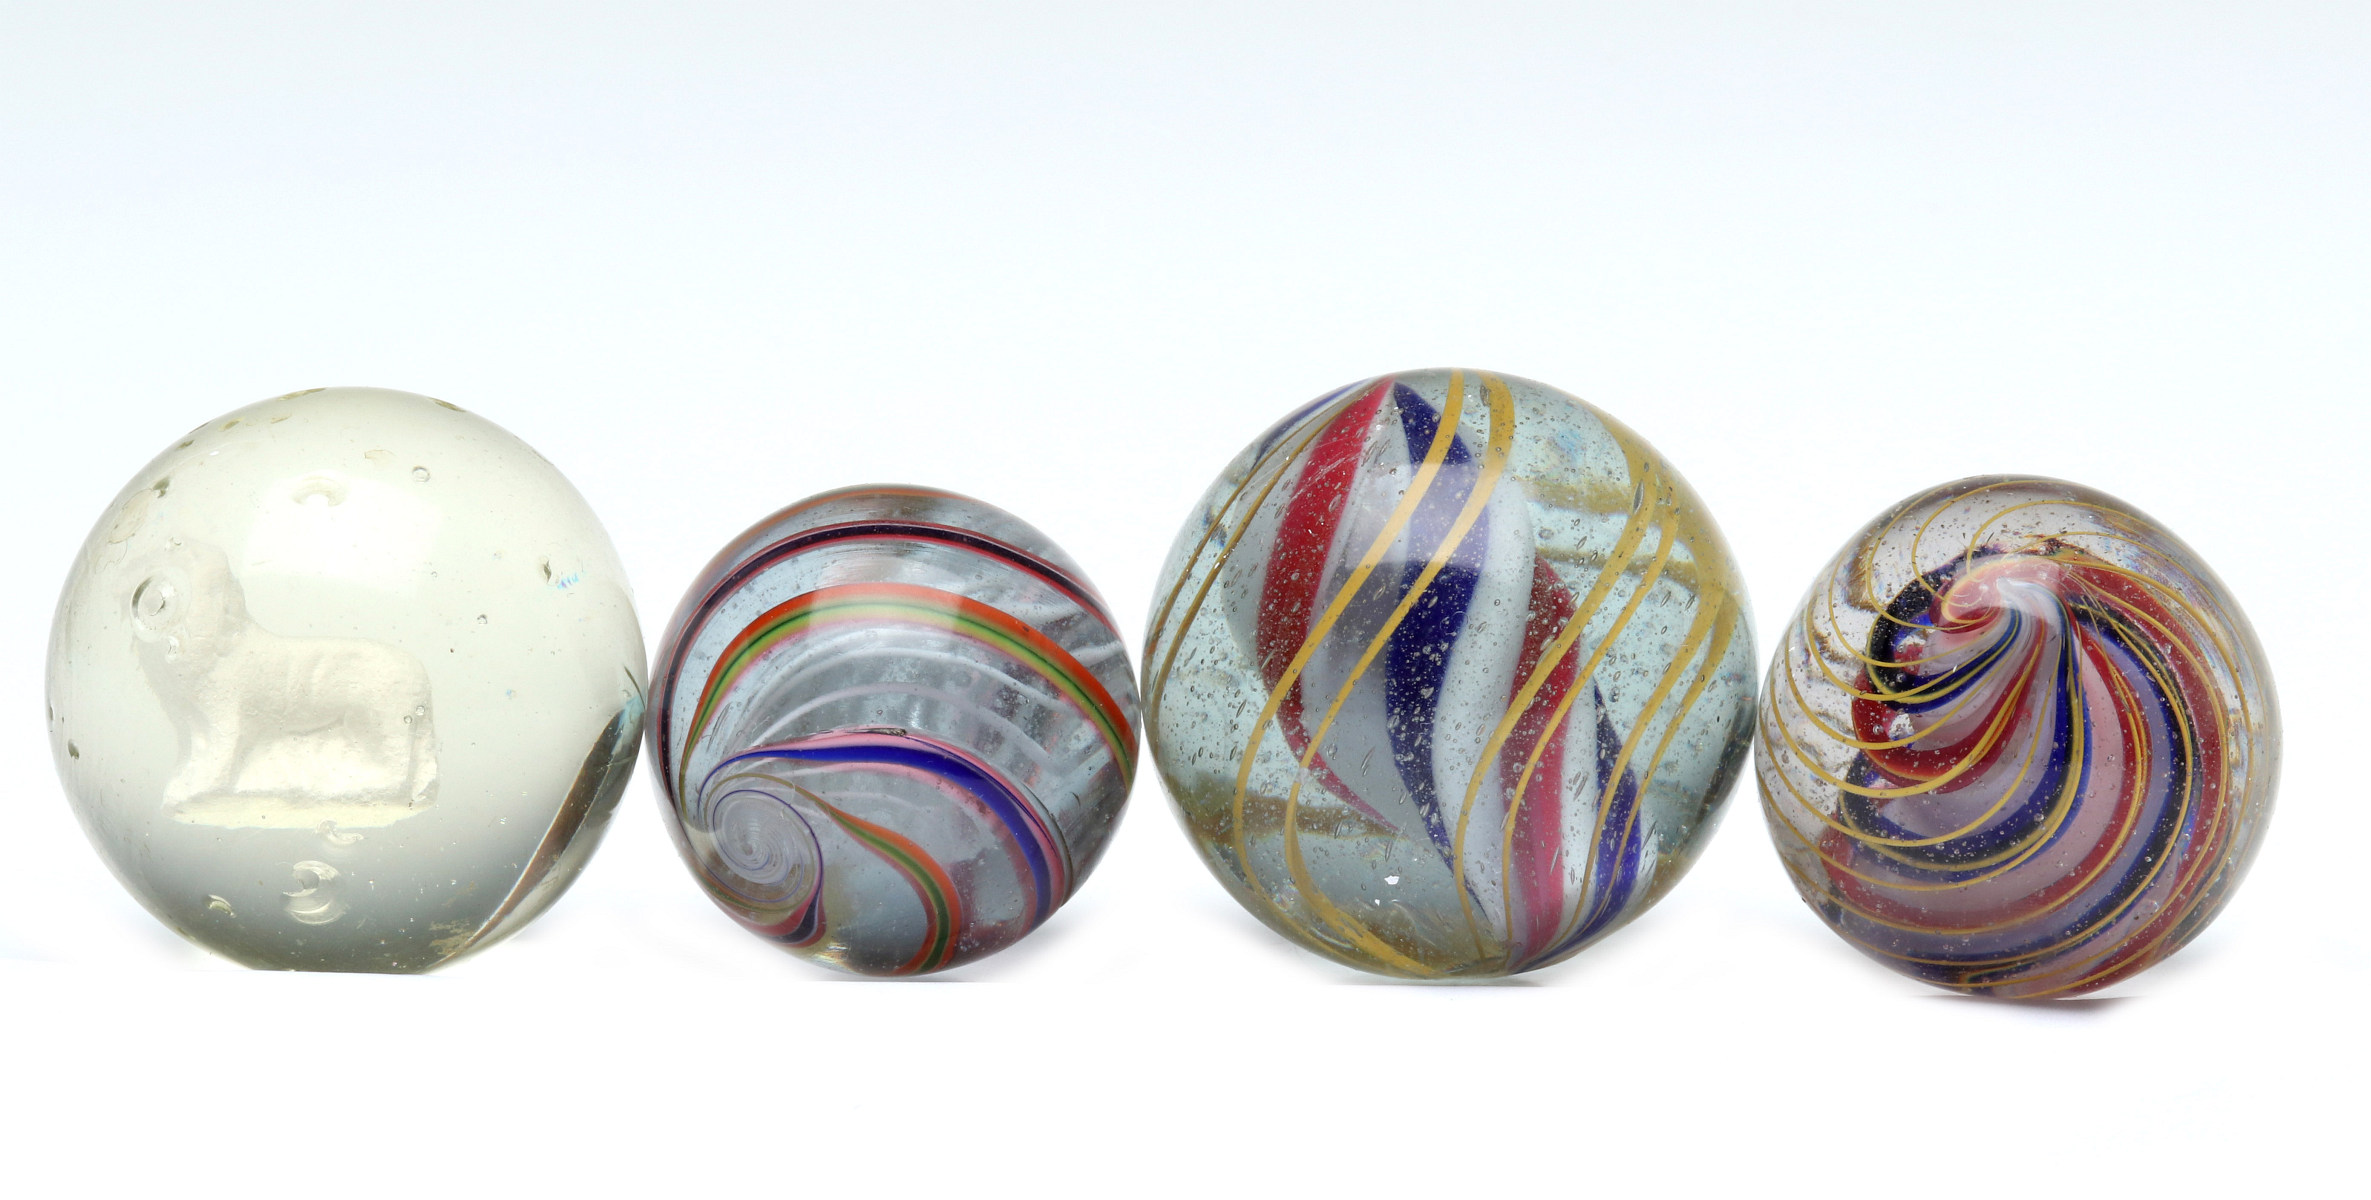 LARGE SULPHIDE AND HANDMADE SWIRL CORE MARBLES